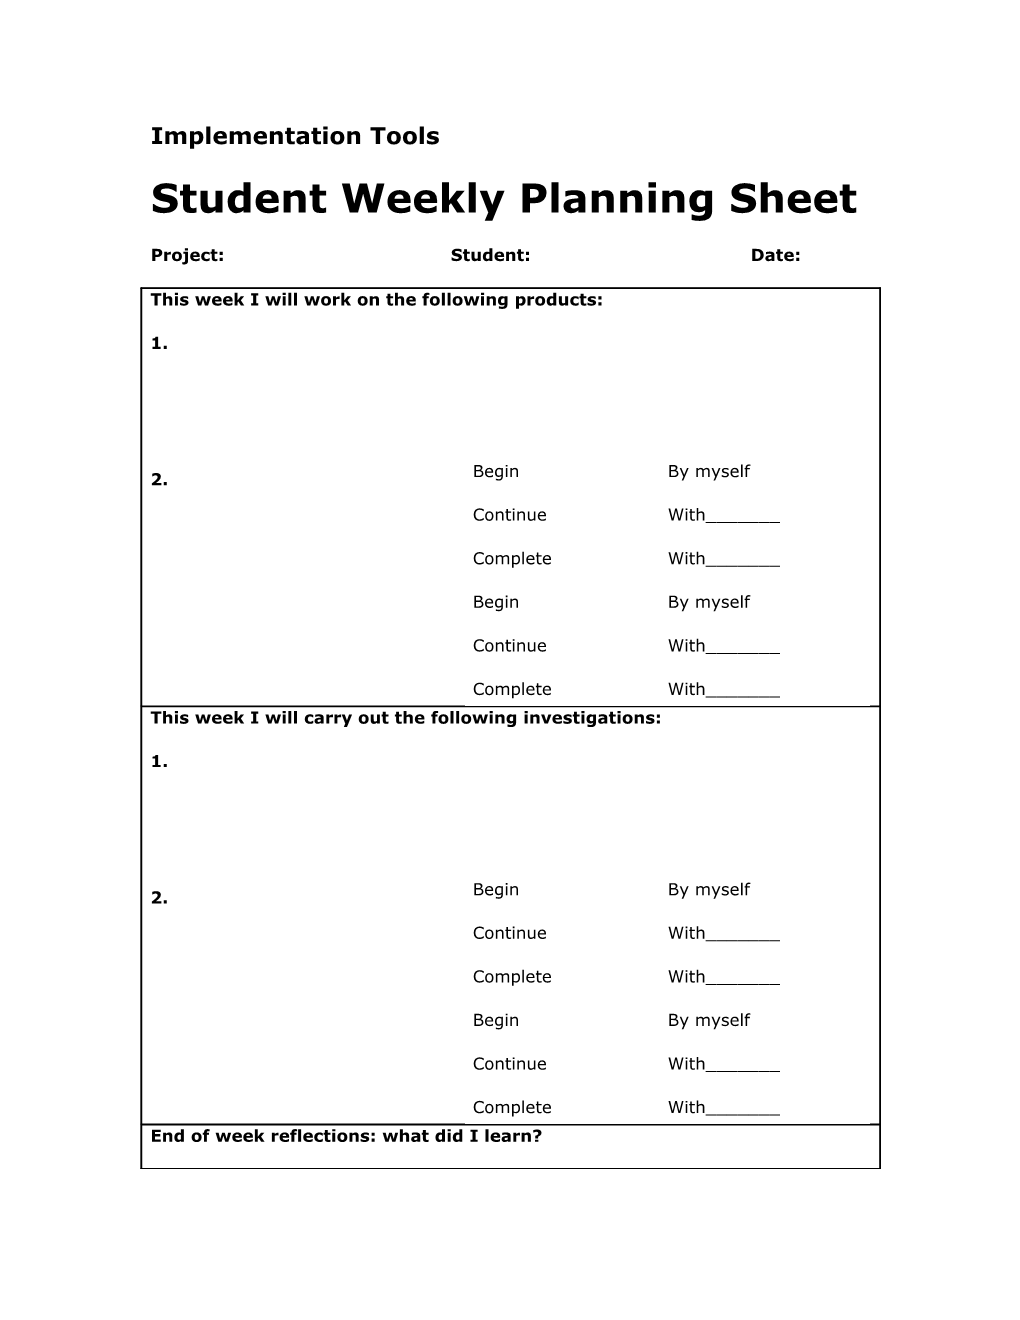 Student Weekly Planning Sheet